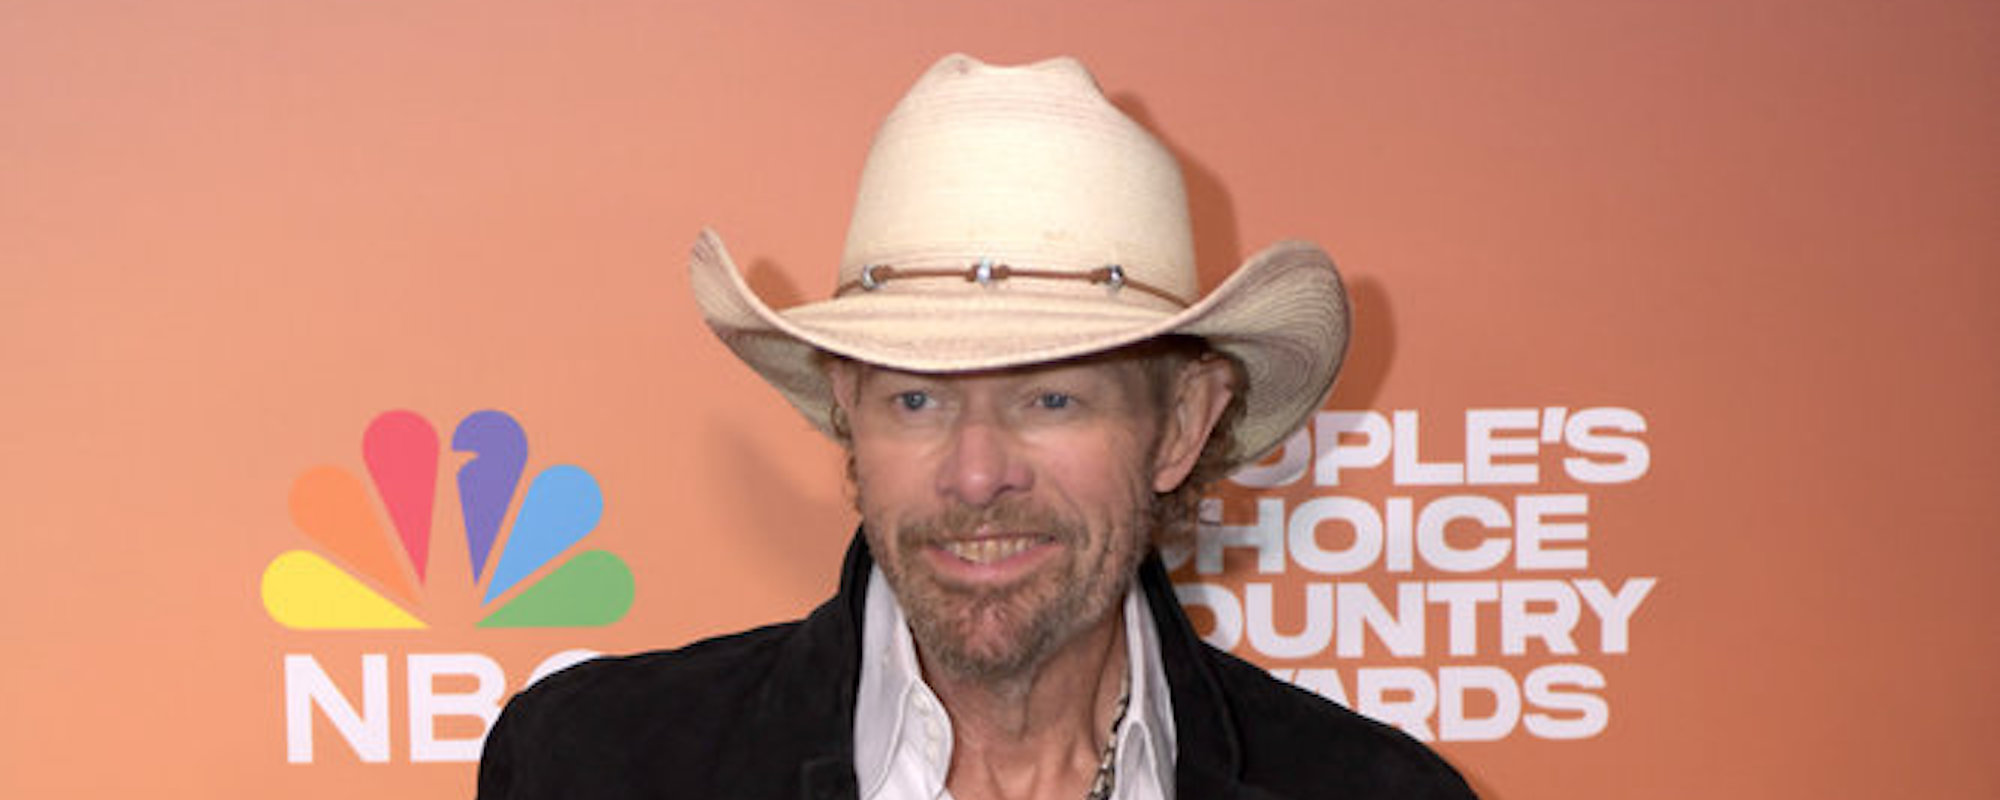 Toby Keith Says He’s “Doing a Lot Better” Amidst Cancer Battle